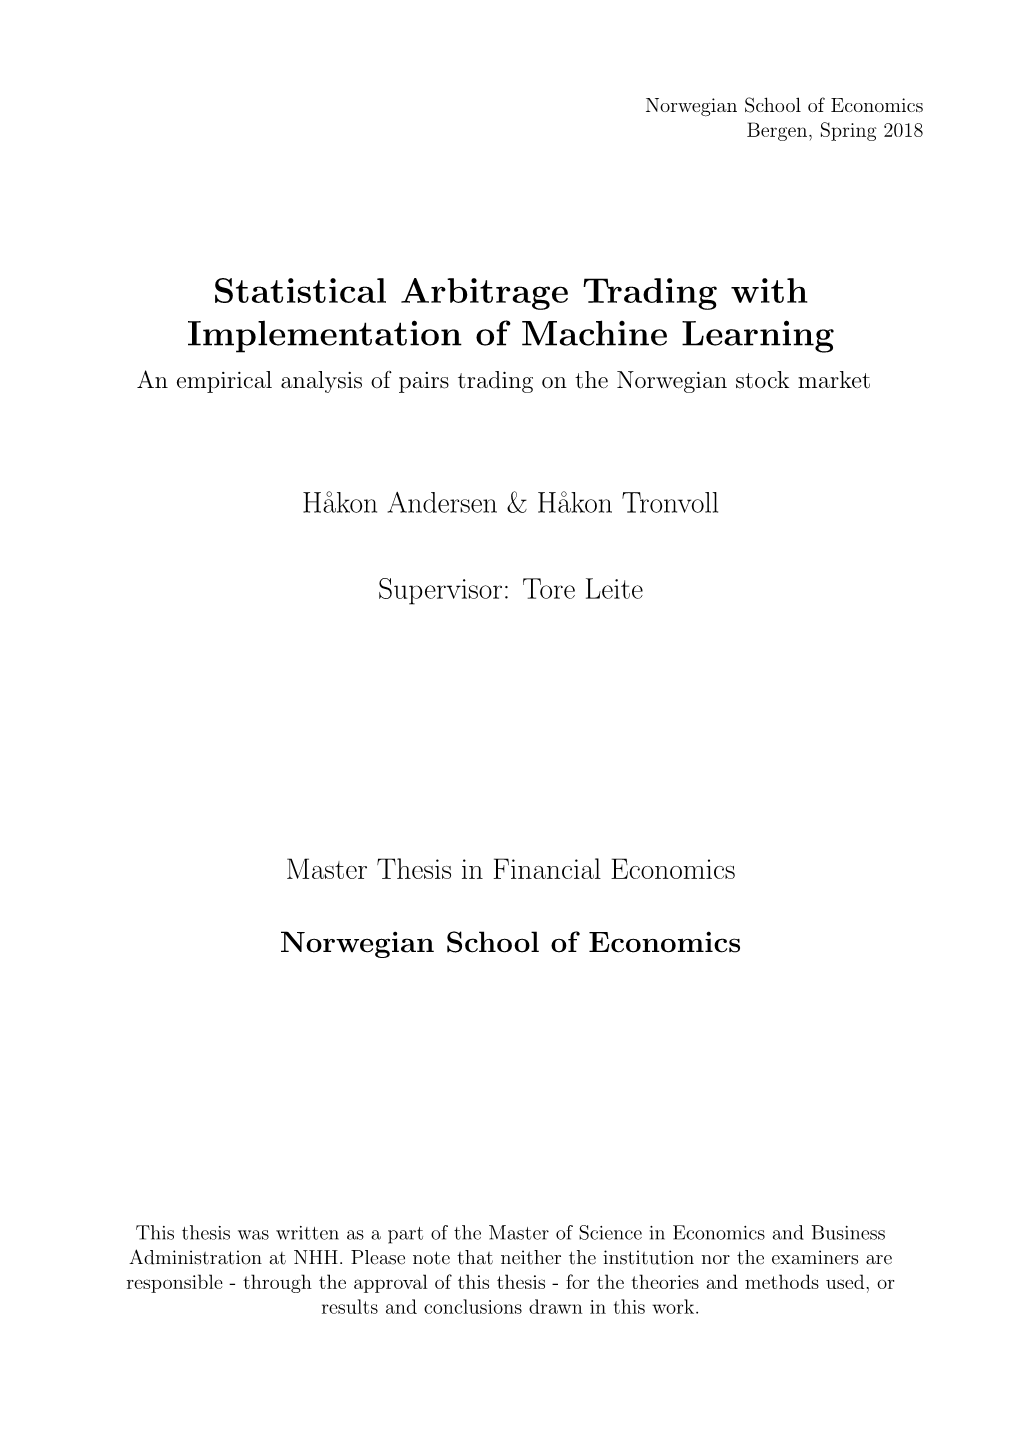 Statistical Arbitrage Trading with Implementation of Machine Learning an Empirical Analysis of Pairs Trading on the Norwegian Stock Market